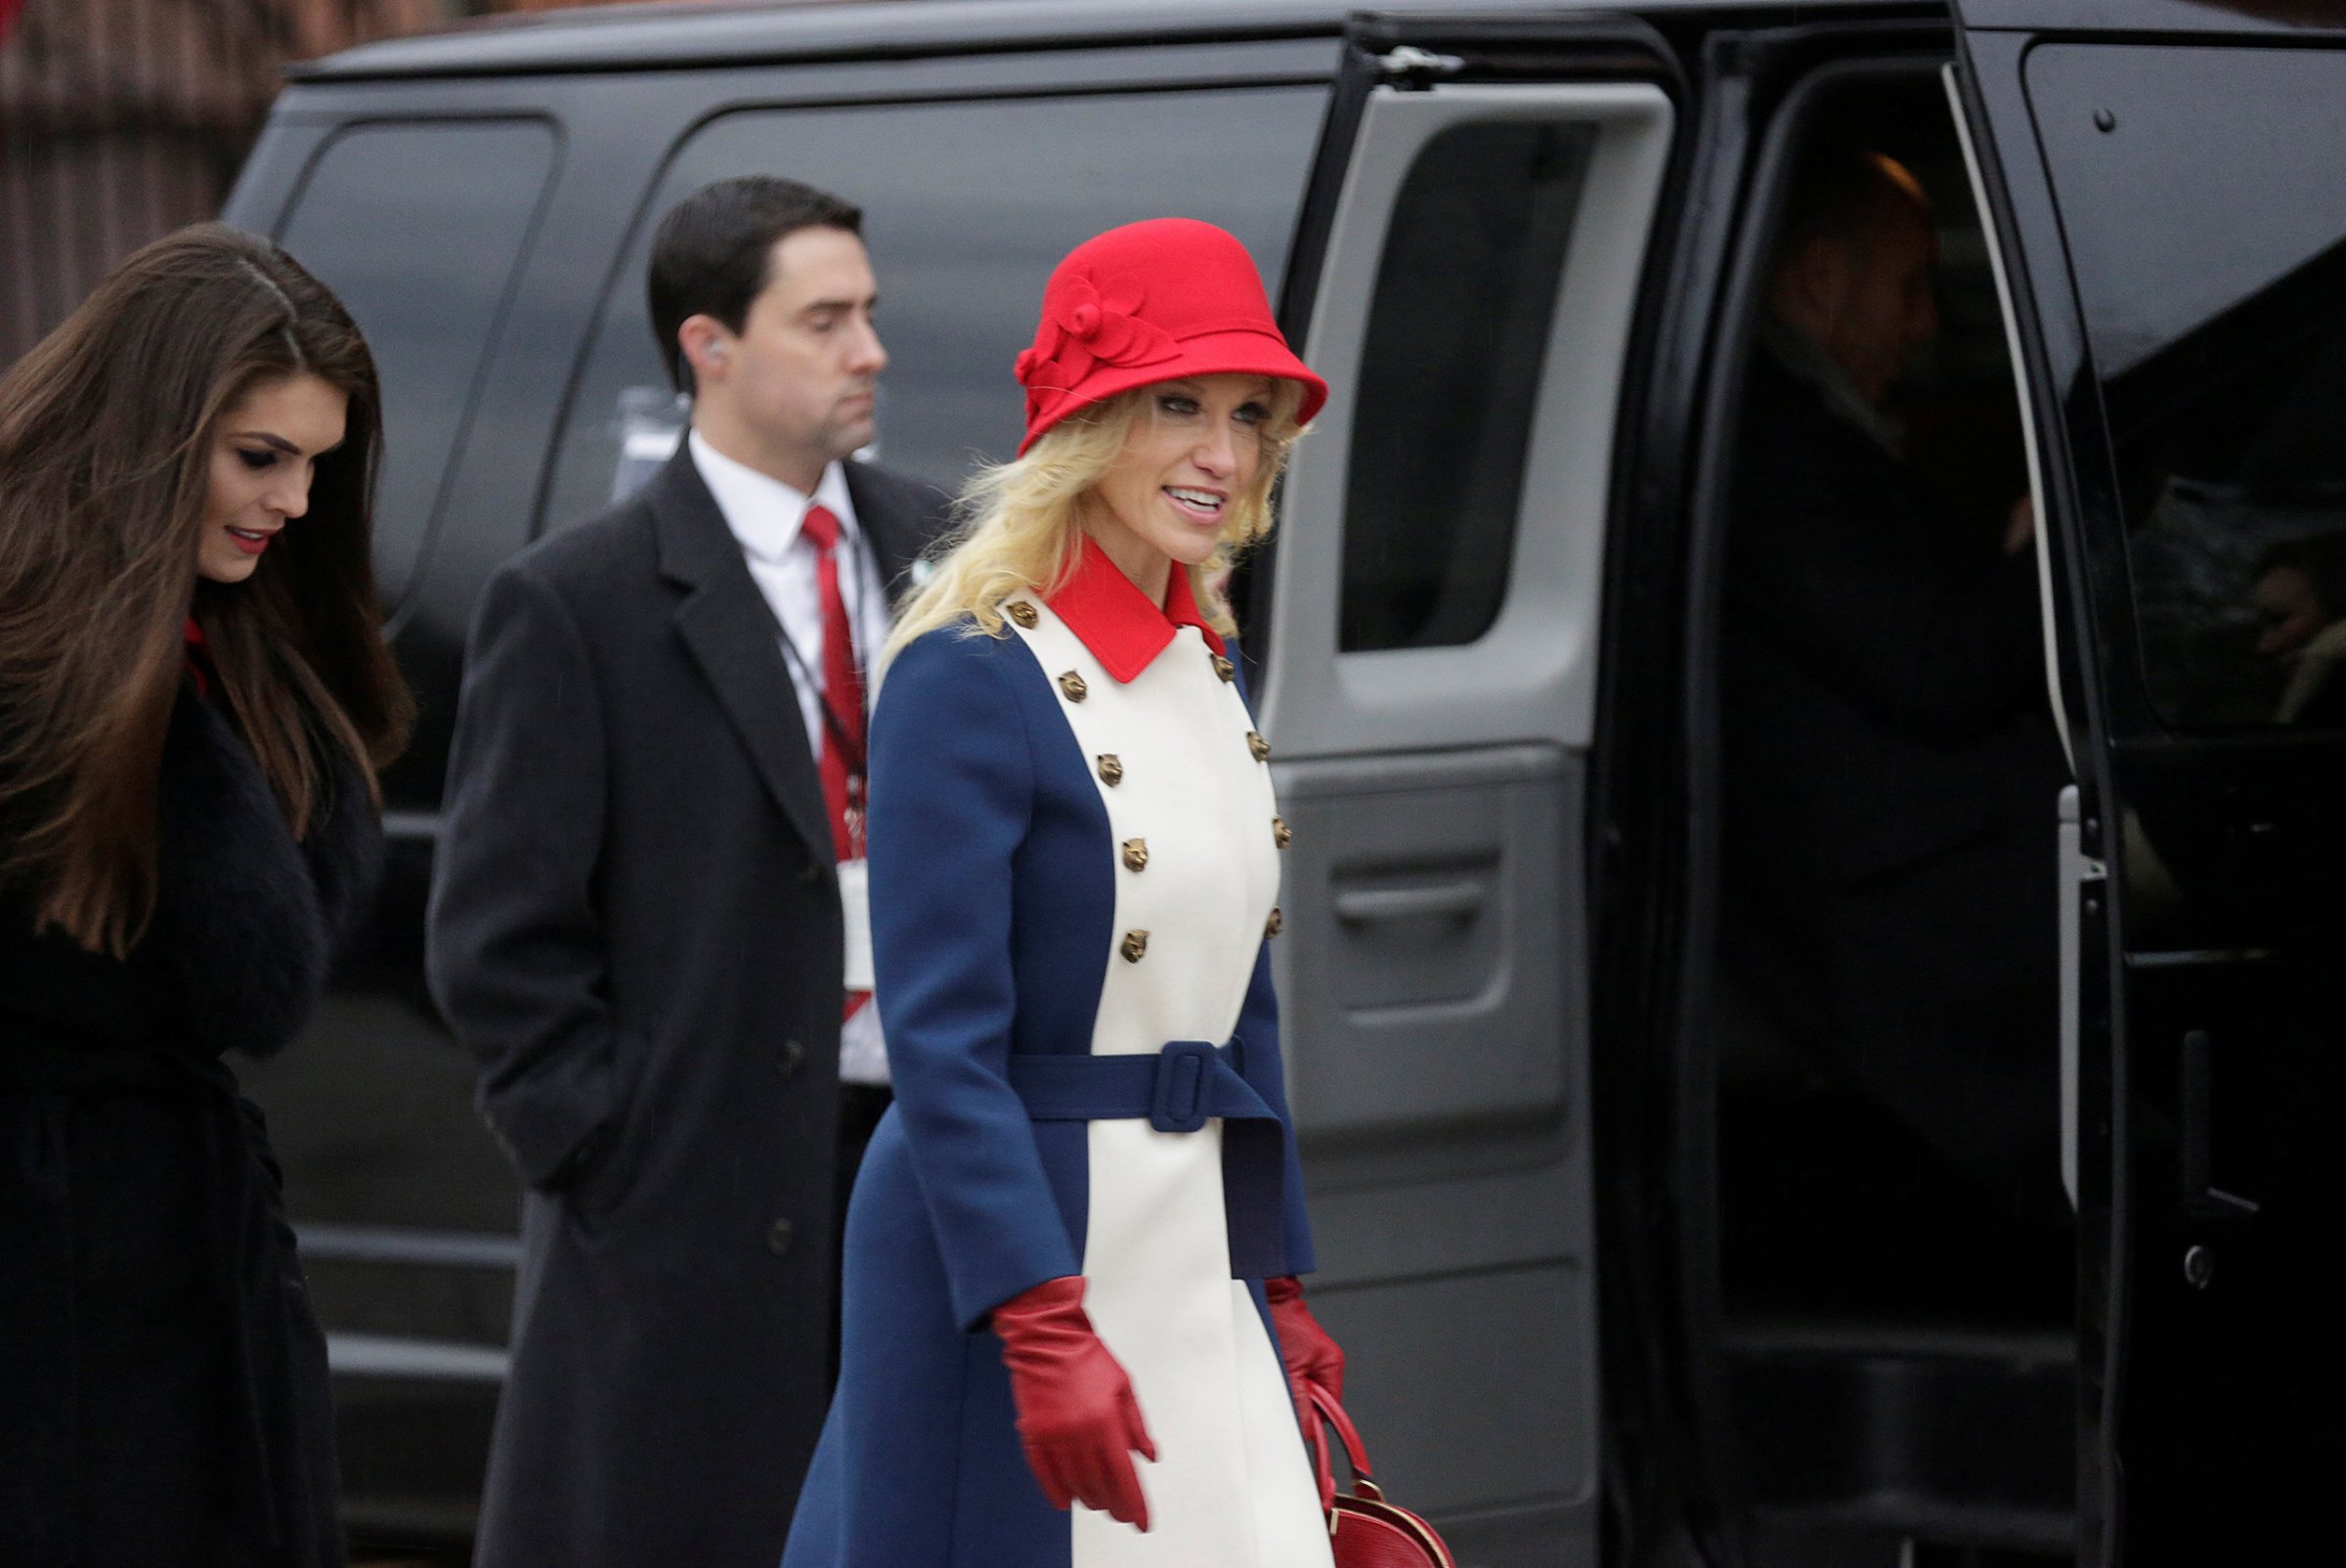 Kellyanne Conway departs for a church service before the 58th Presidential Inauguration in Washington